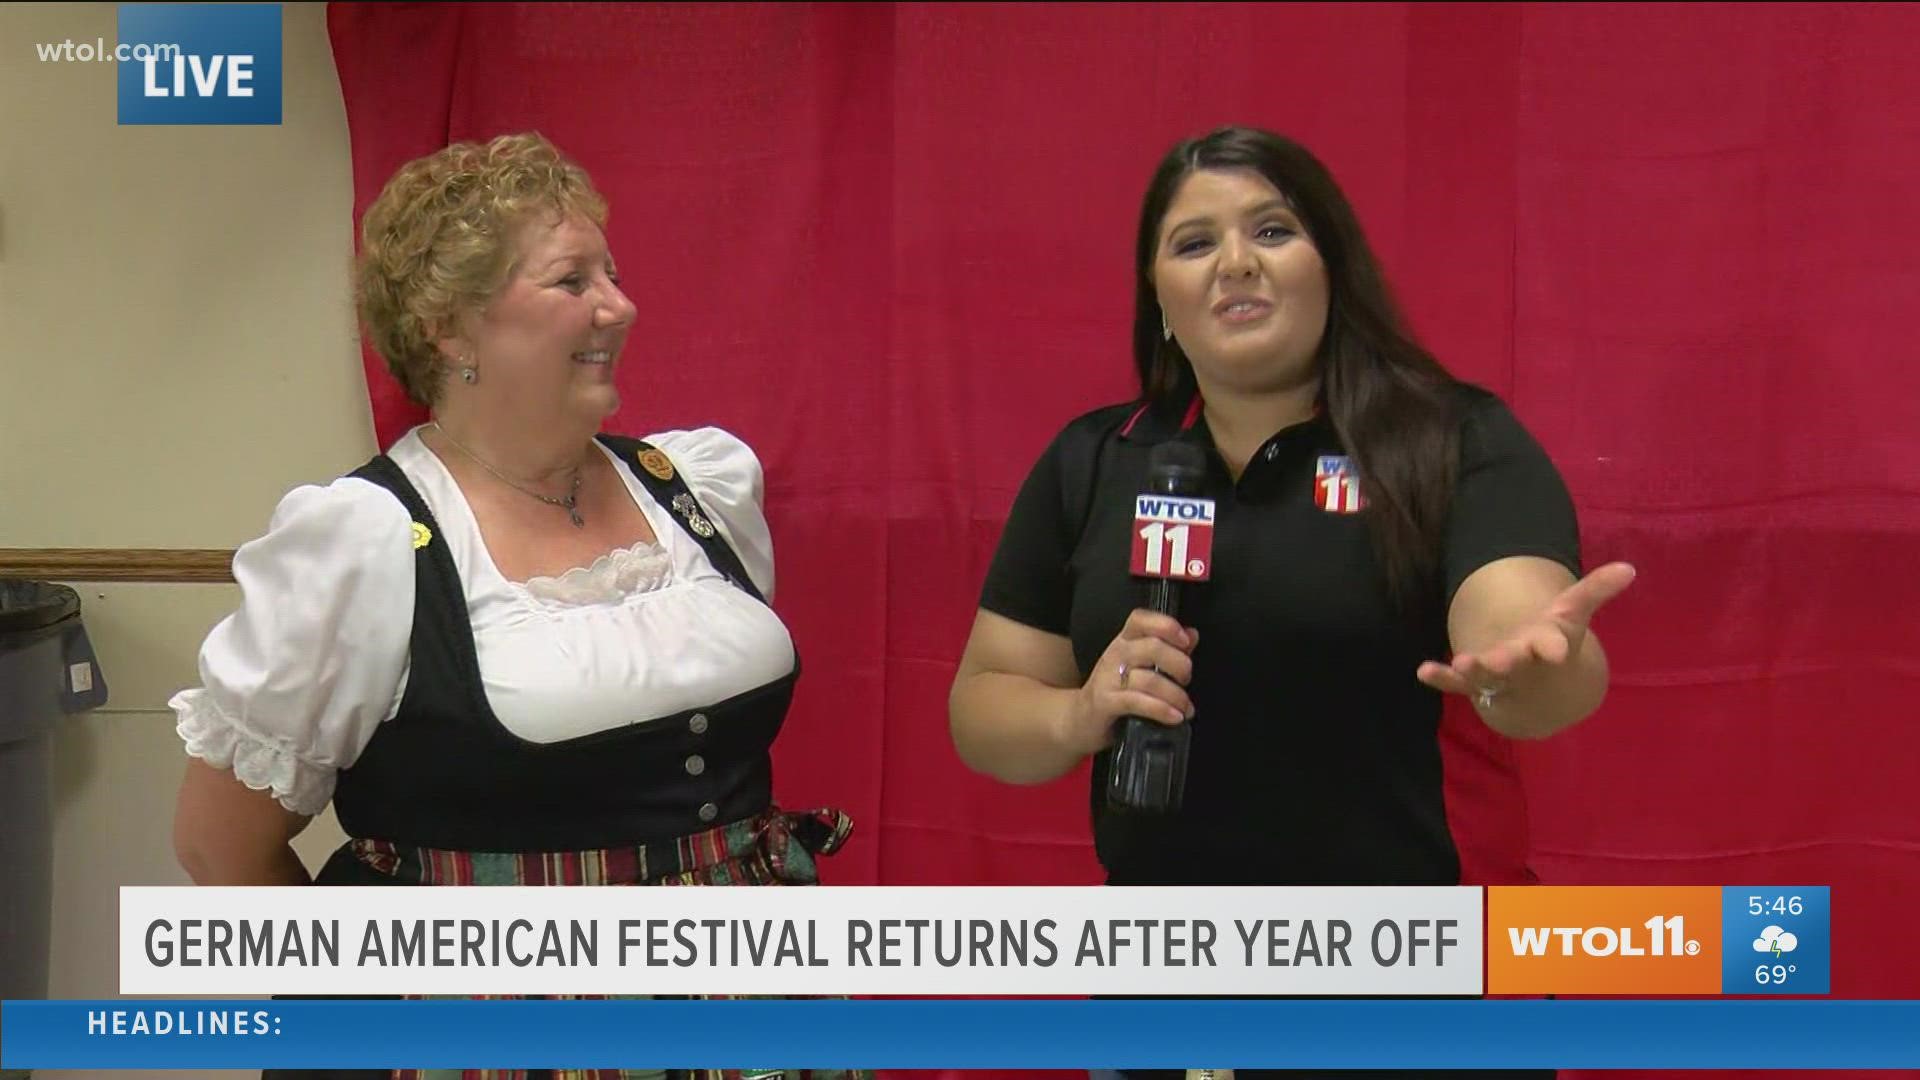 Zeinab Cheaib breaks out her German skills in honor of the German-American Festival kicking off on Friday!